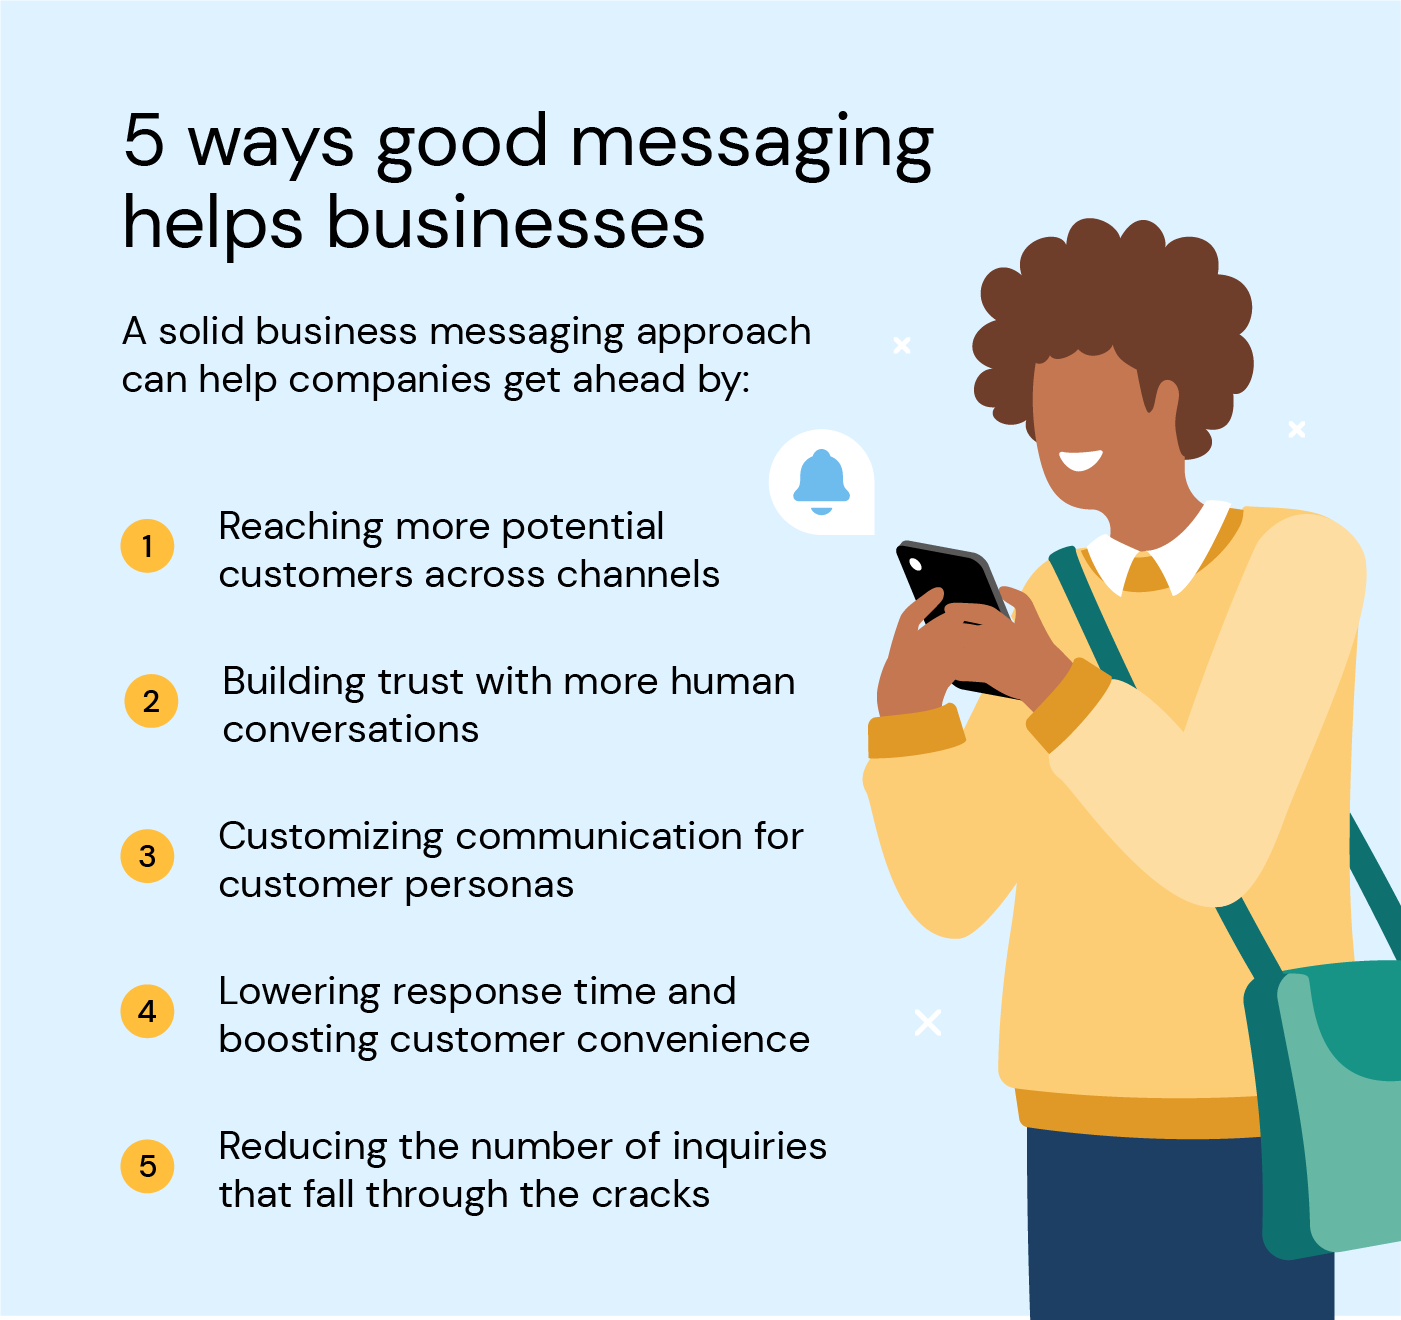 5 ways good messaging helps businesses: 1-reaching more customers, 2-building trust, 3-customizing communications, 4-lowering response time, 5-reducing inquiries